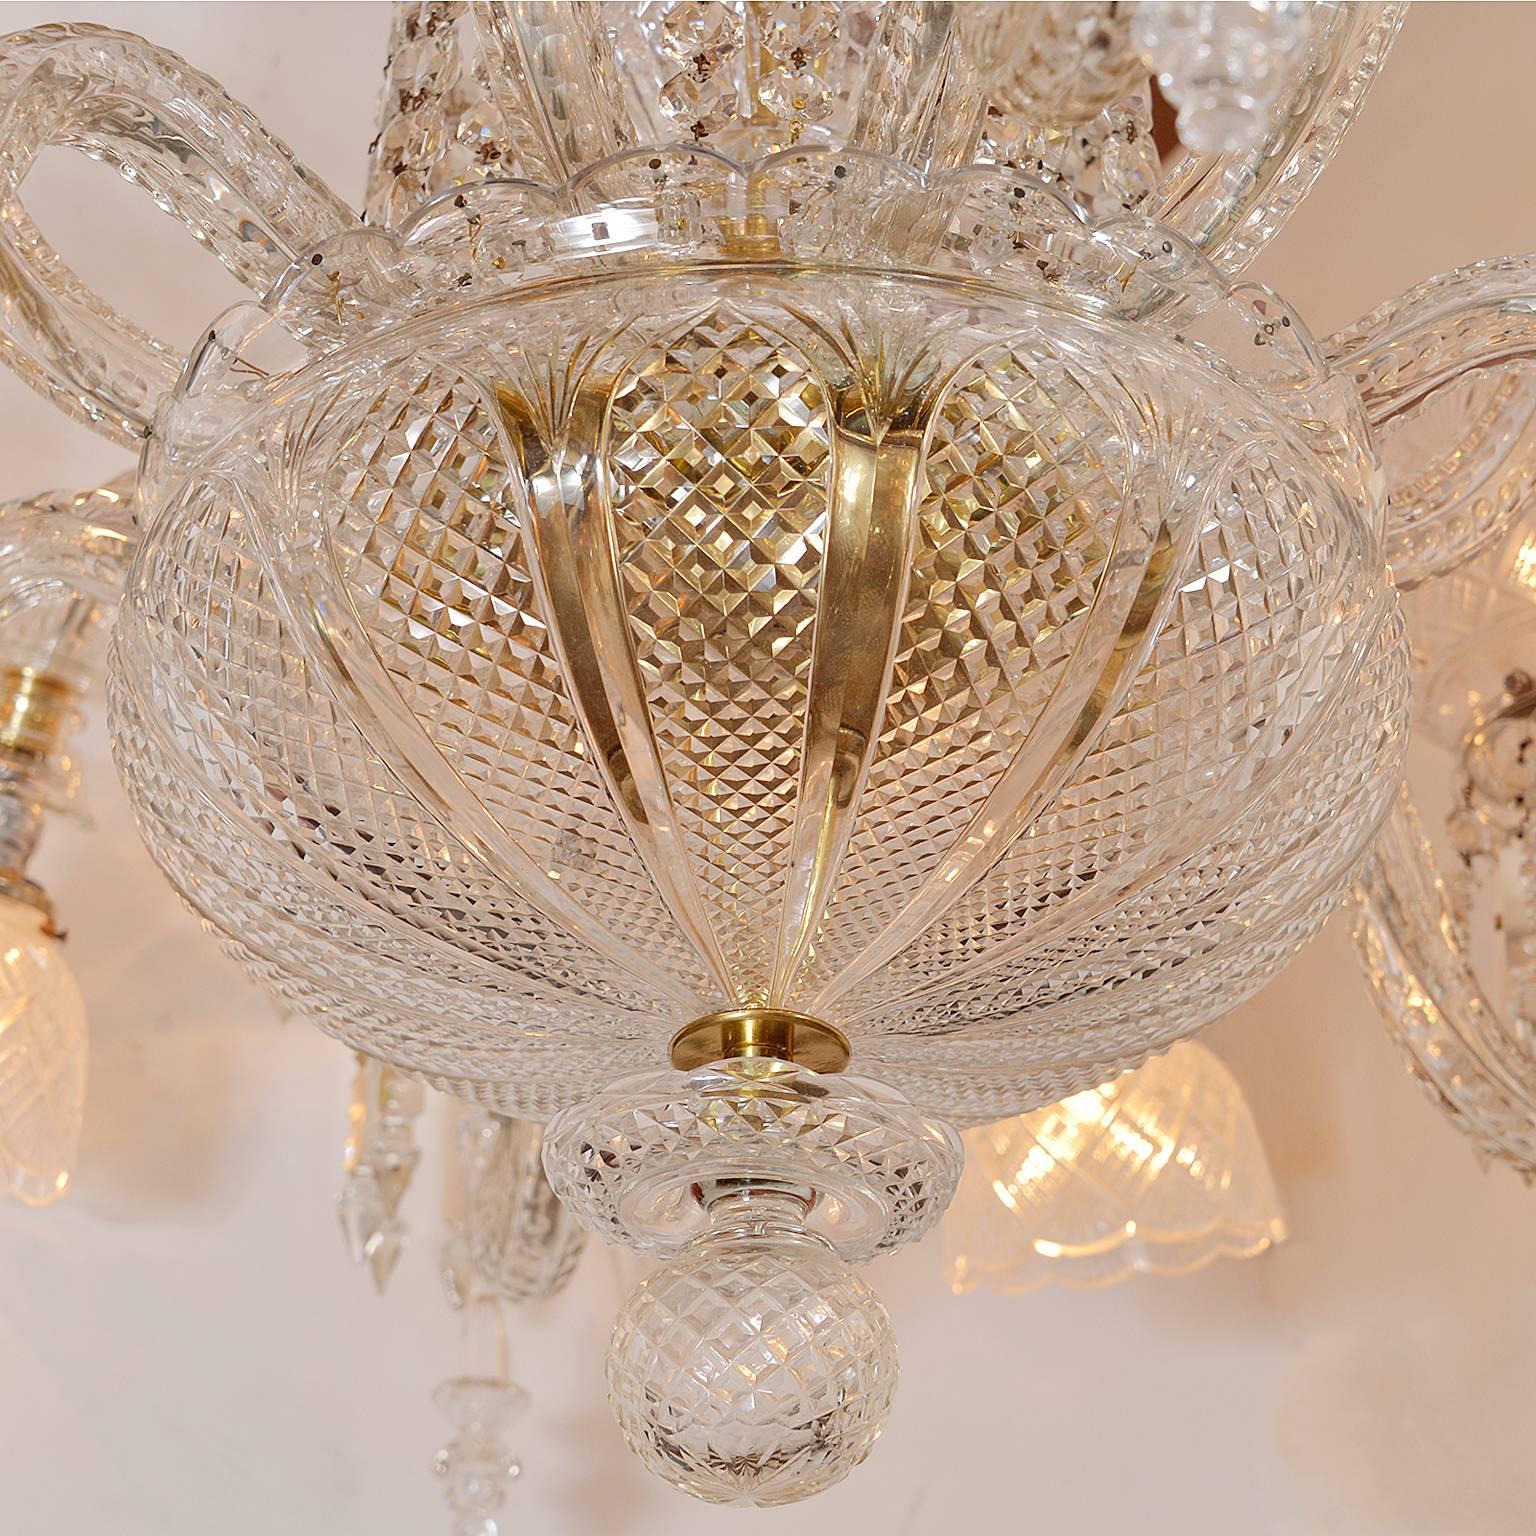 Victorian Mid-Late 1800s Combination Gas or Electric Crystal Chandelier For Sale